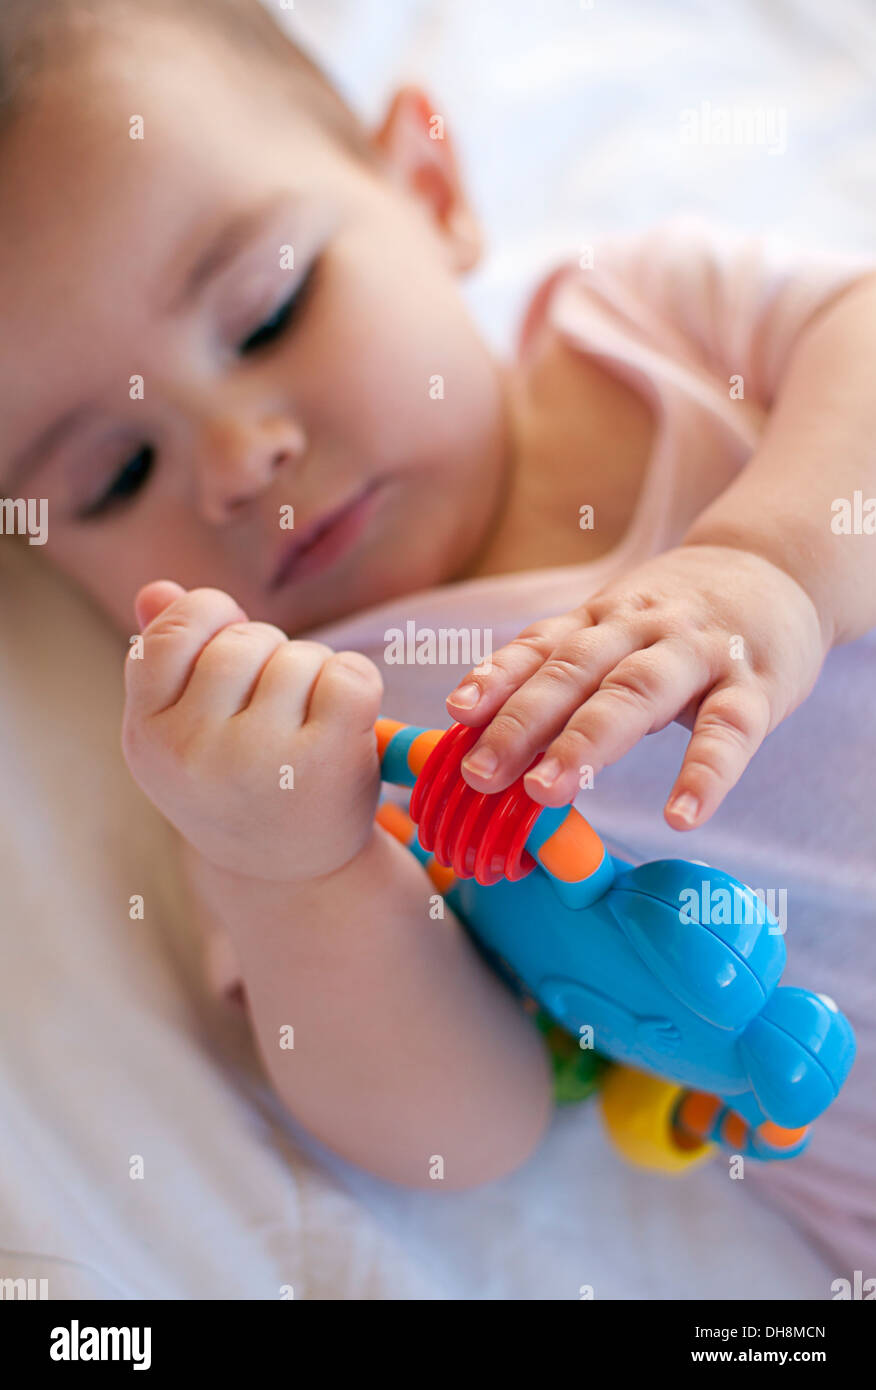 Baby playing with toy Stock Photo